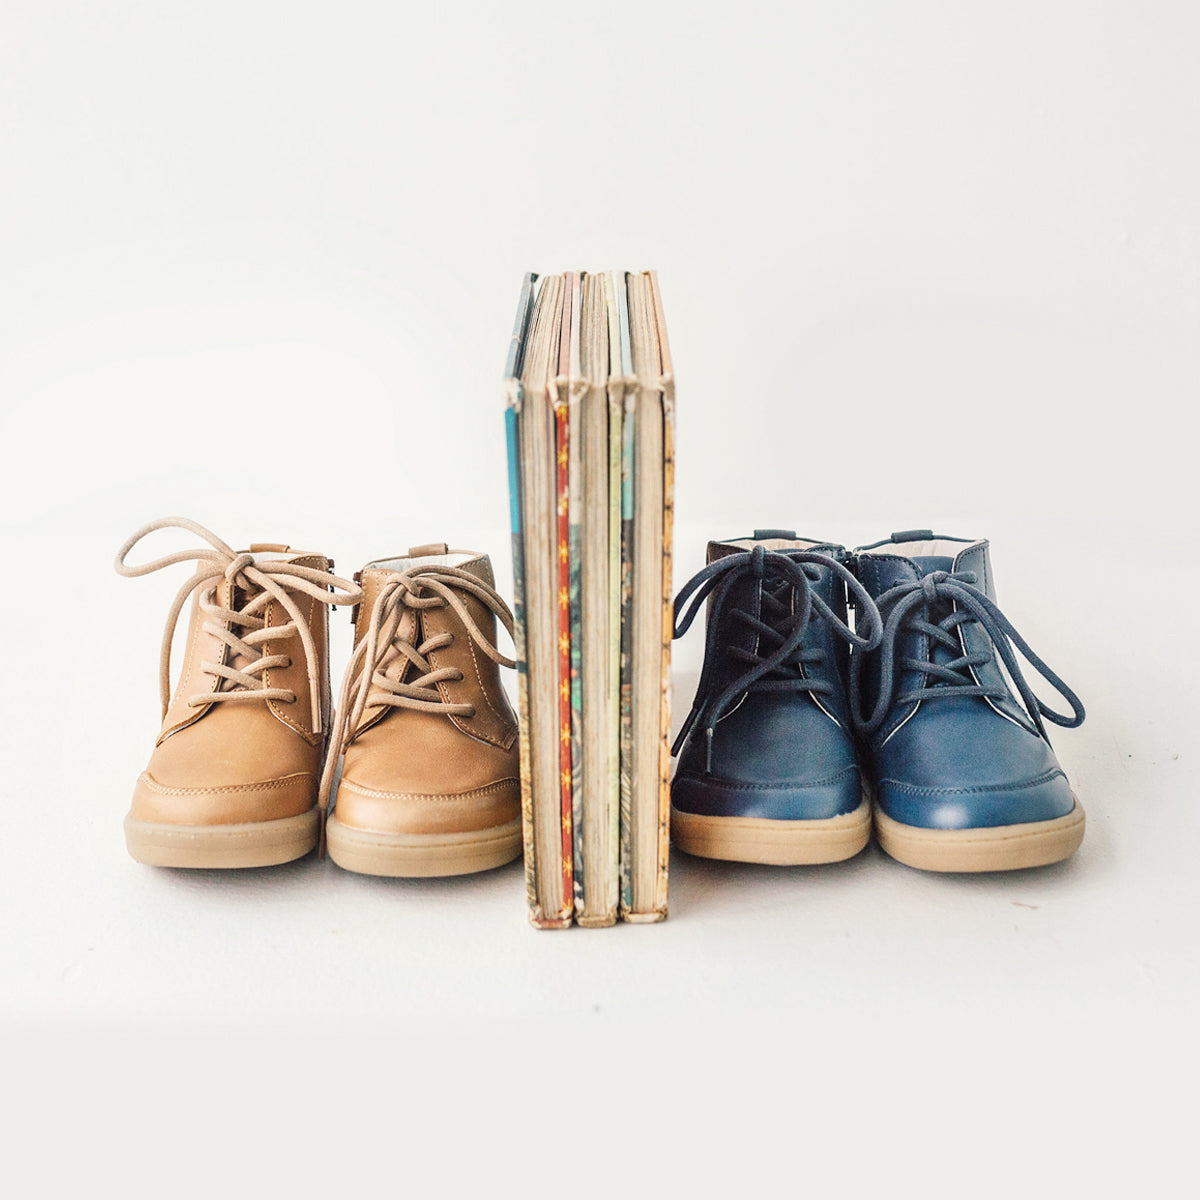 Two pairs of Archie boots next to books. Colour tan and midnight blue